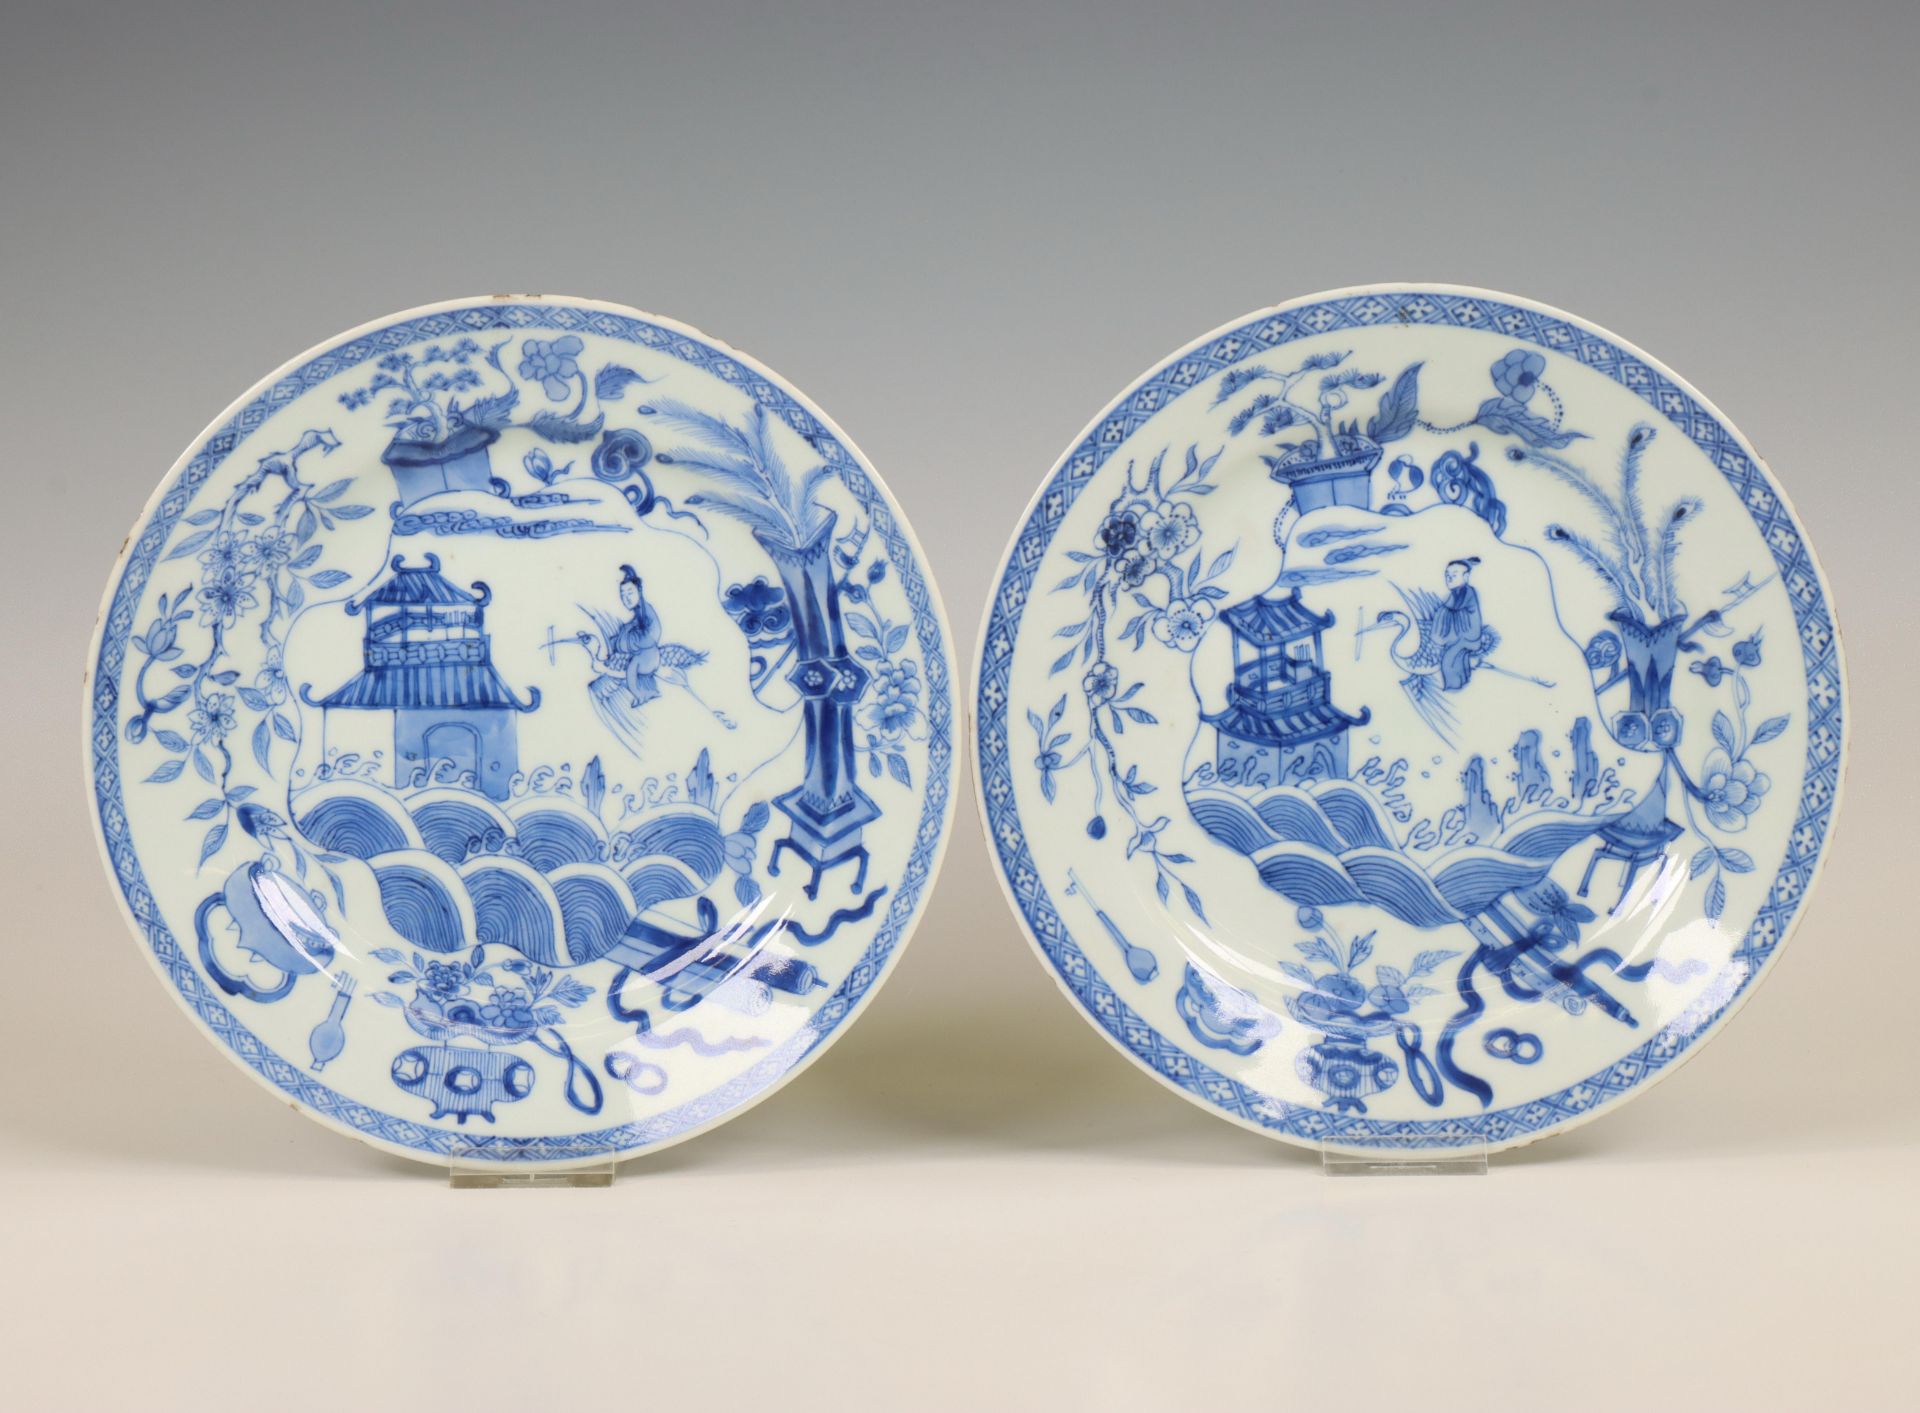 China, a pair of blue and white porcelain plates, 18th century,